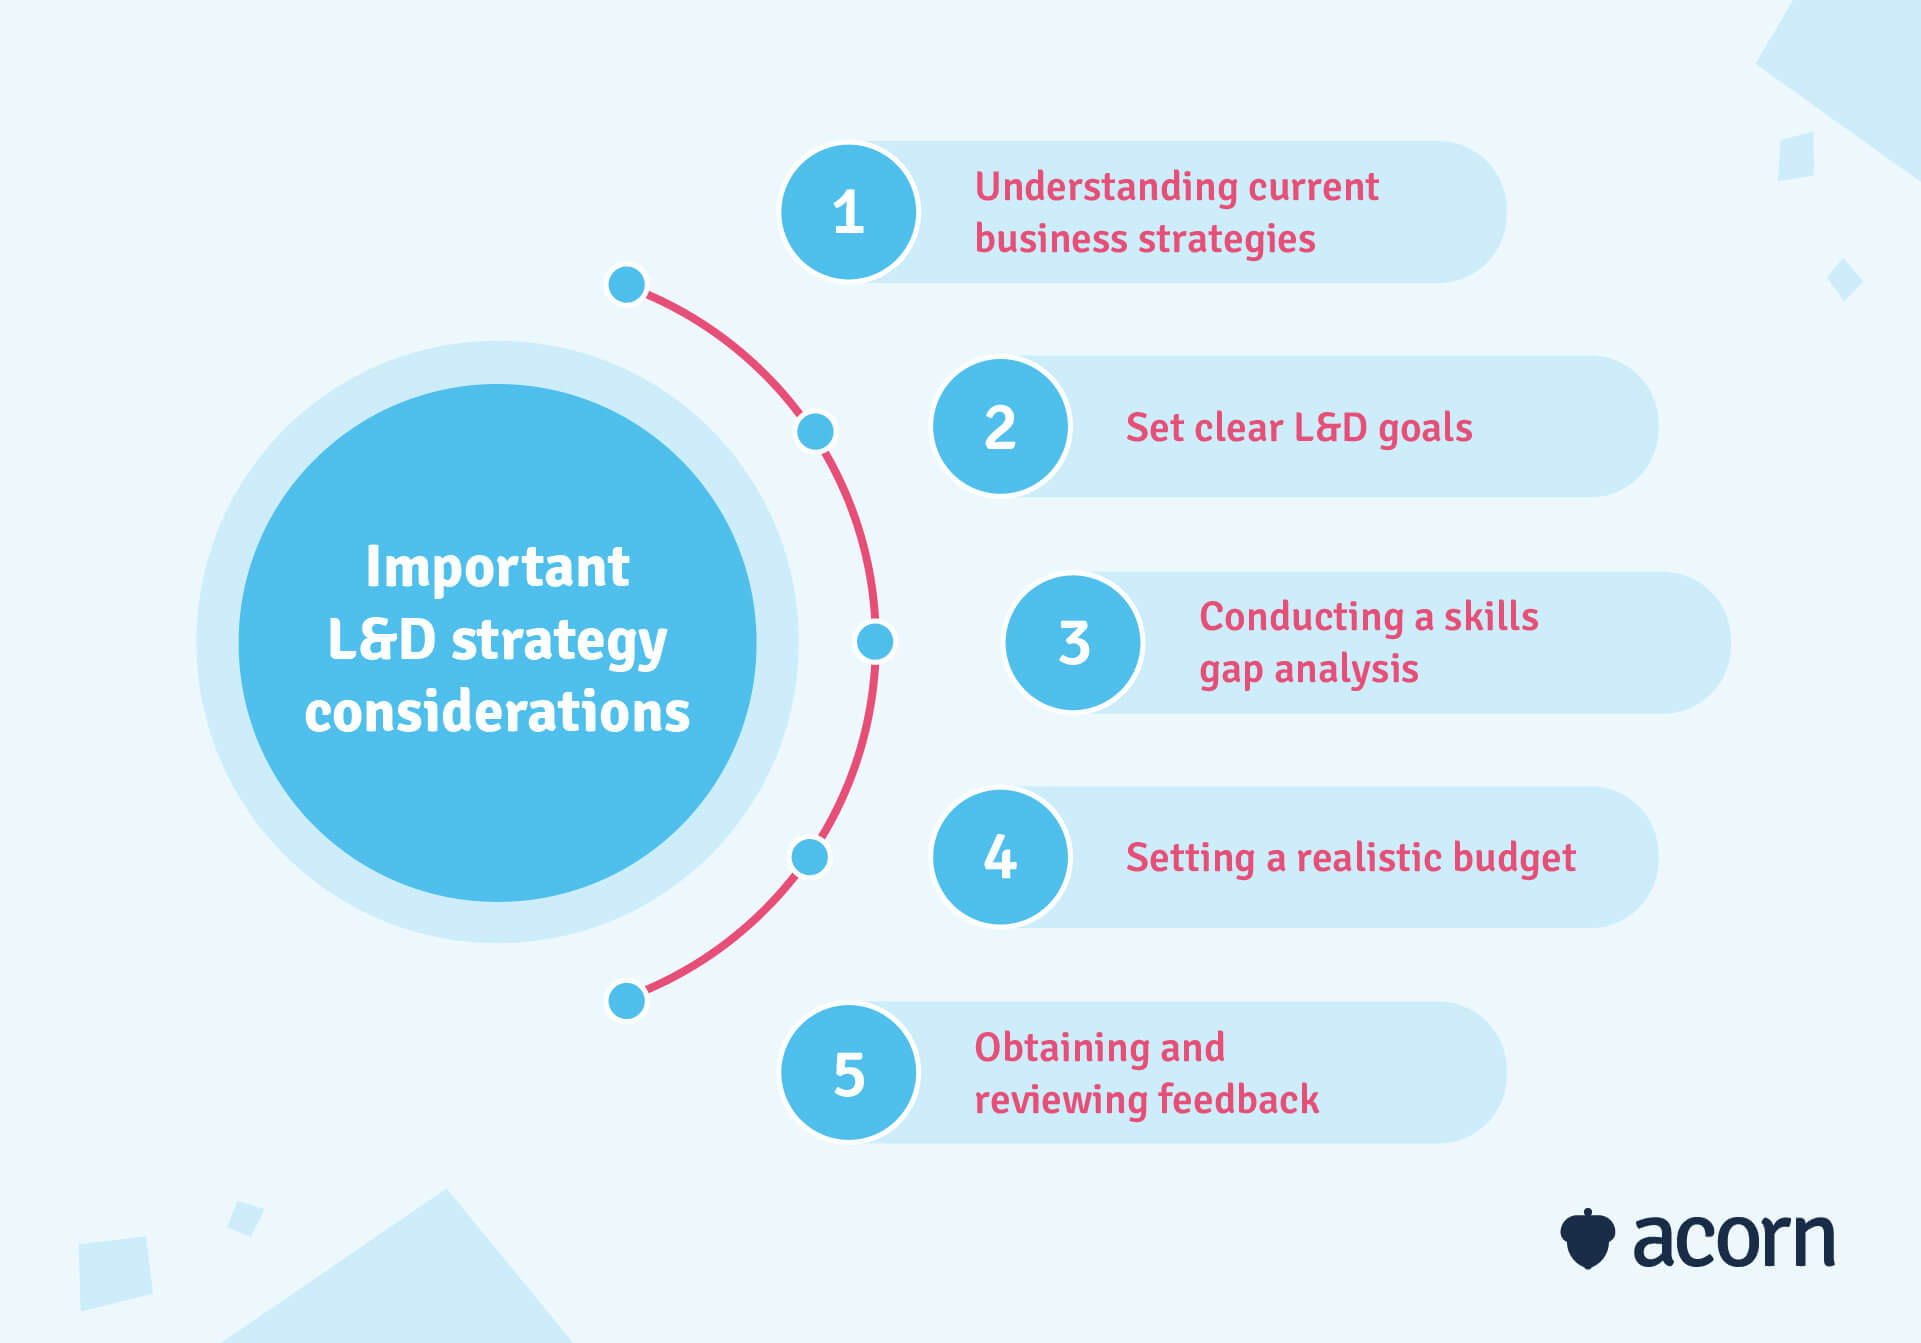 Important L&D strategy considerations